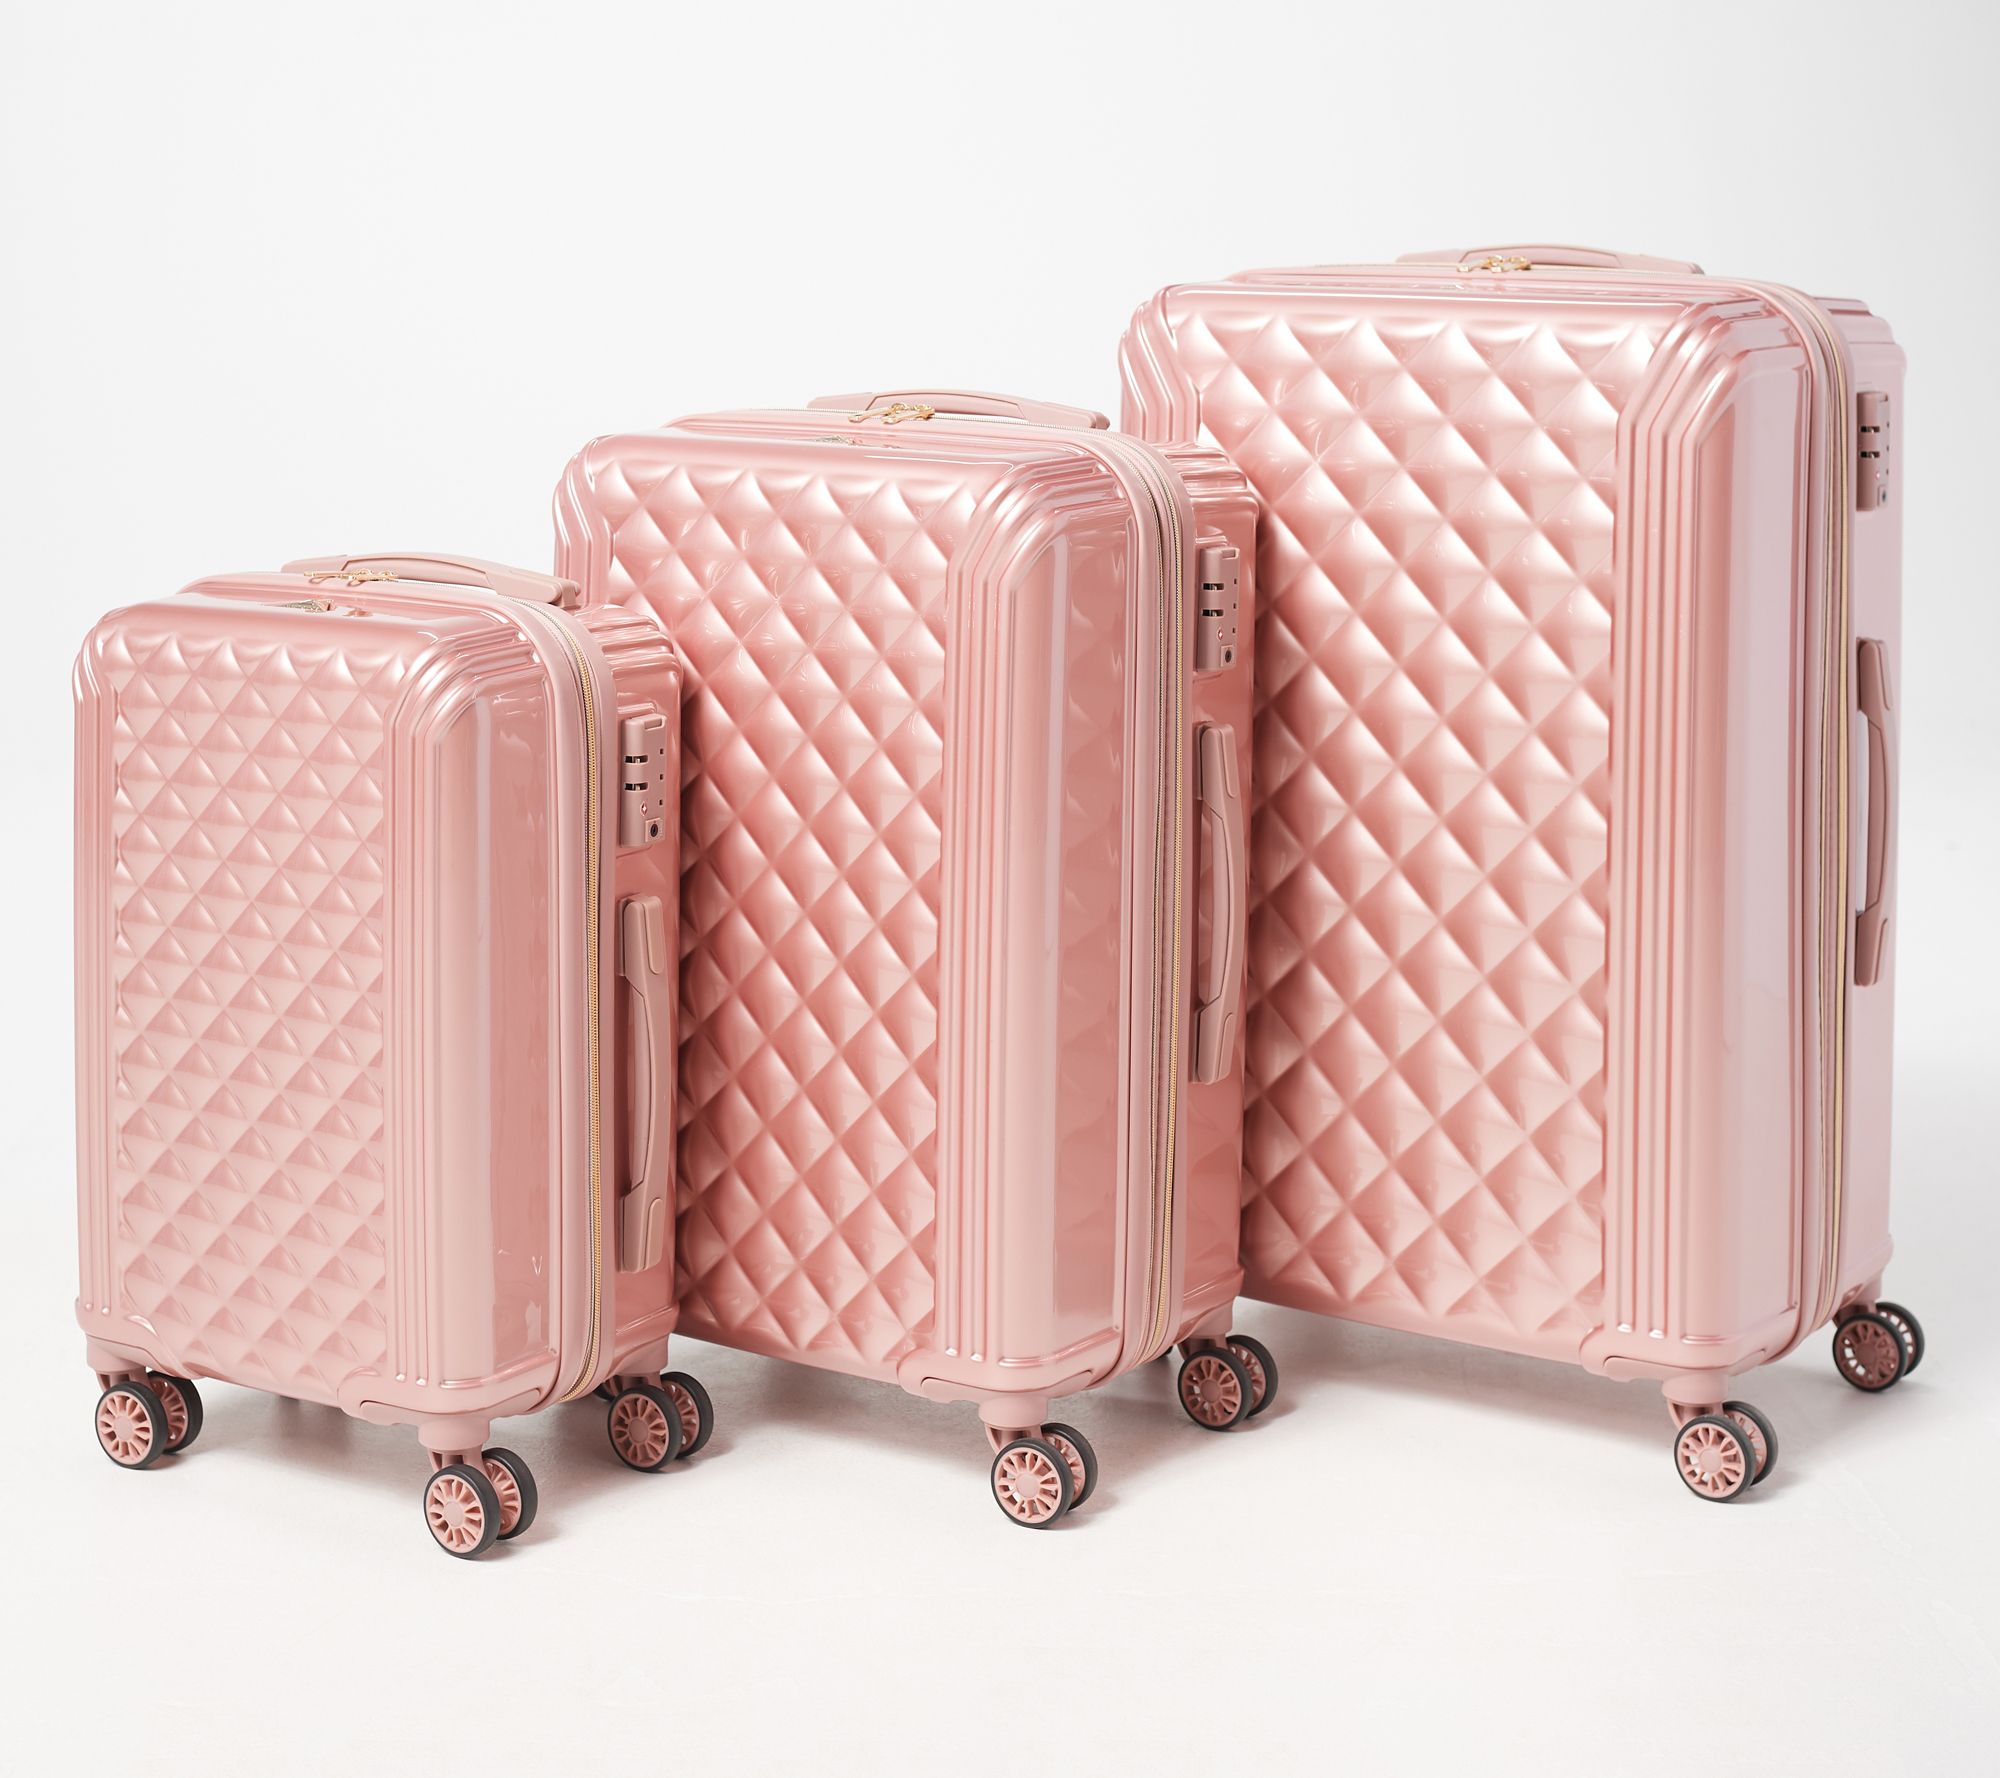 Triforce Luggage Set of 3 Spinner Luggage - Avignon - QVC.com